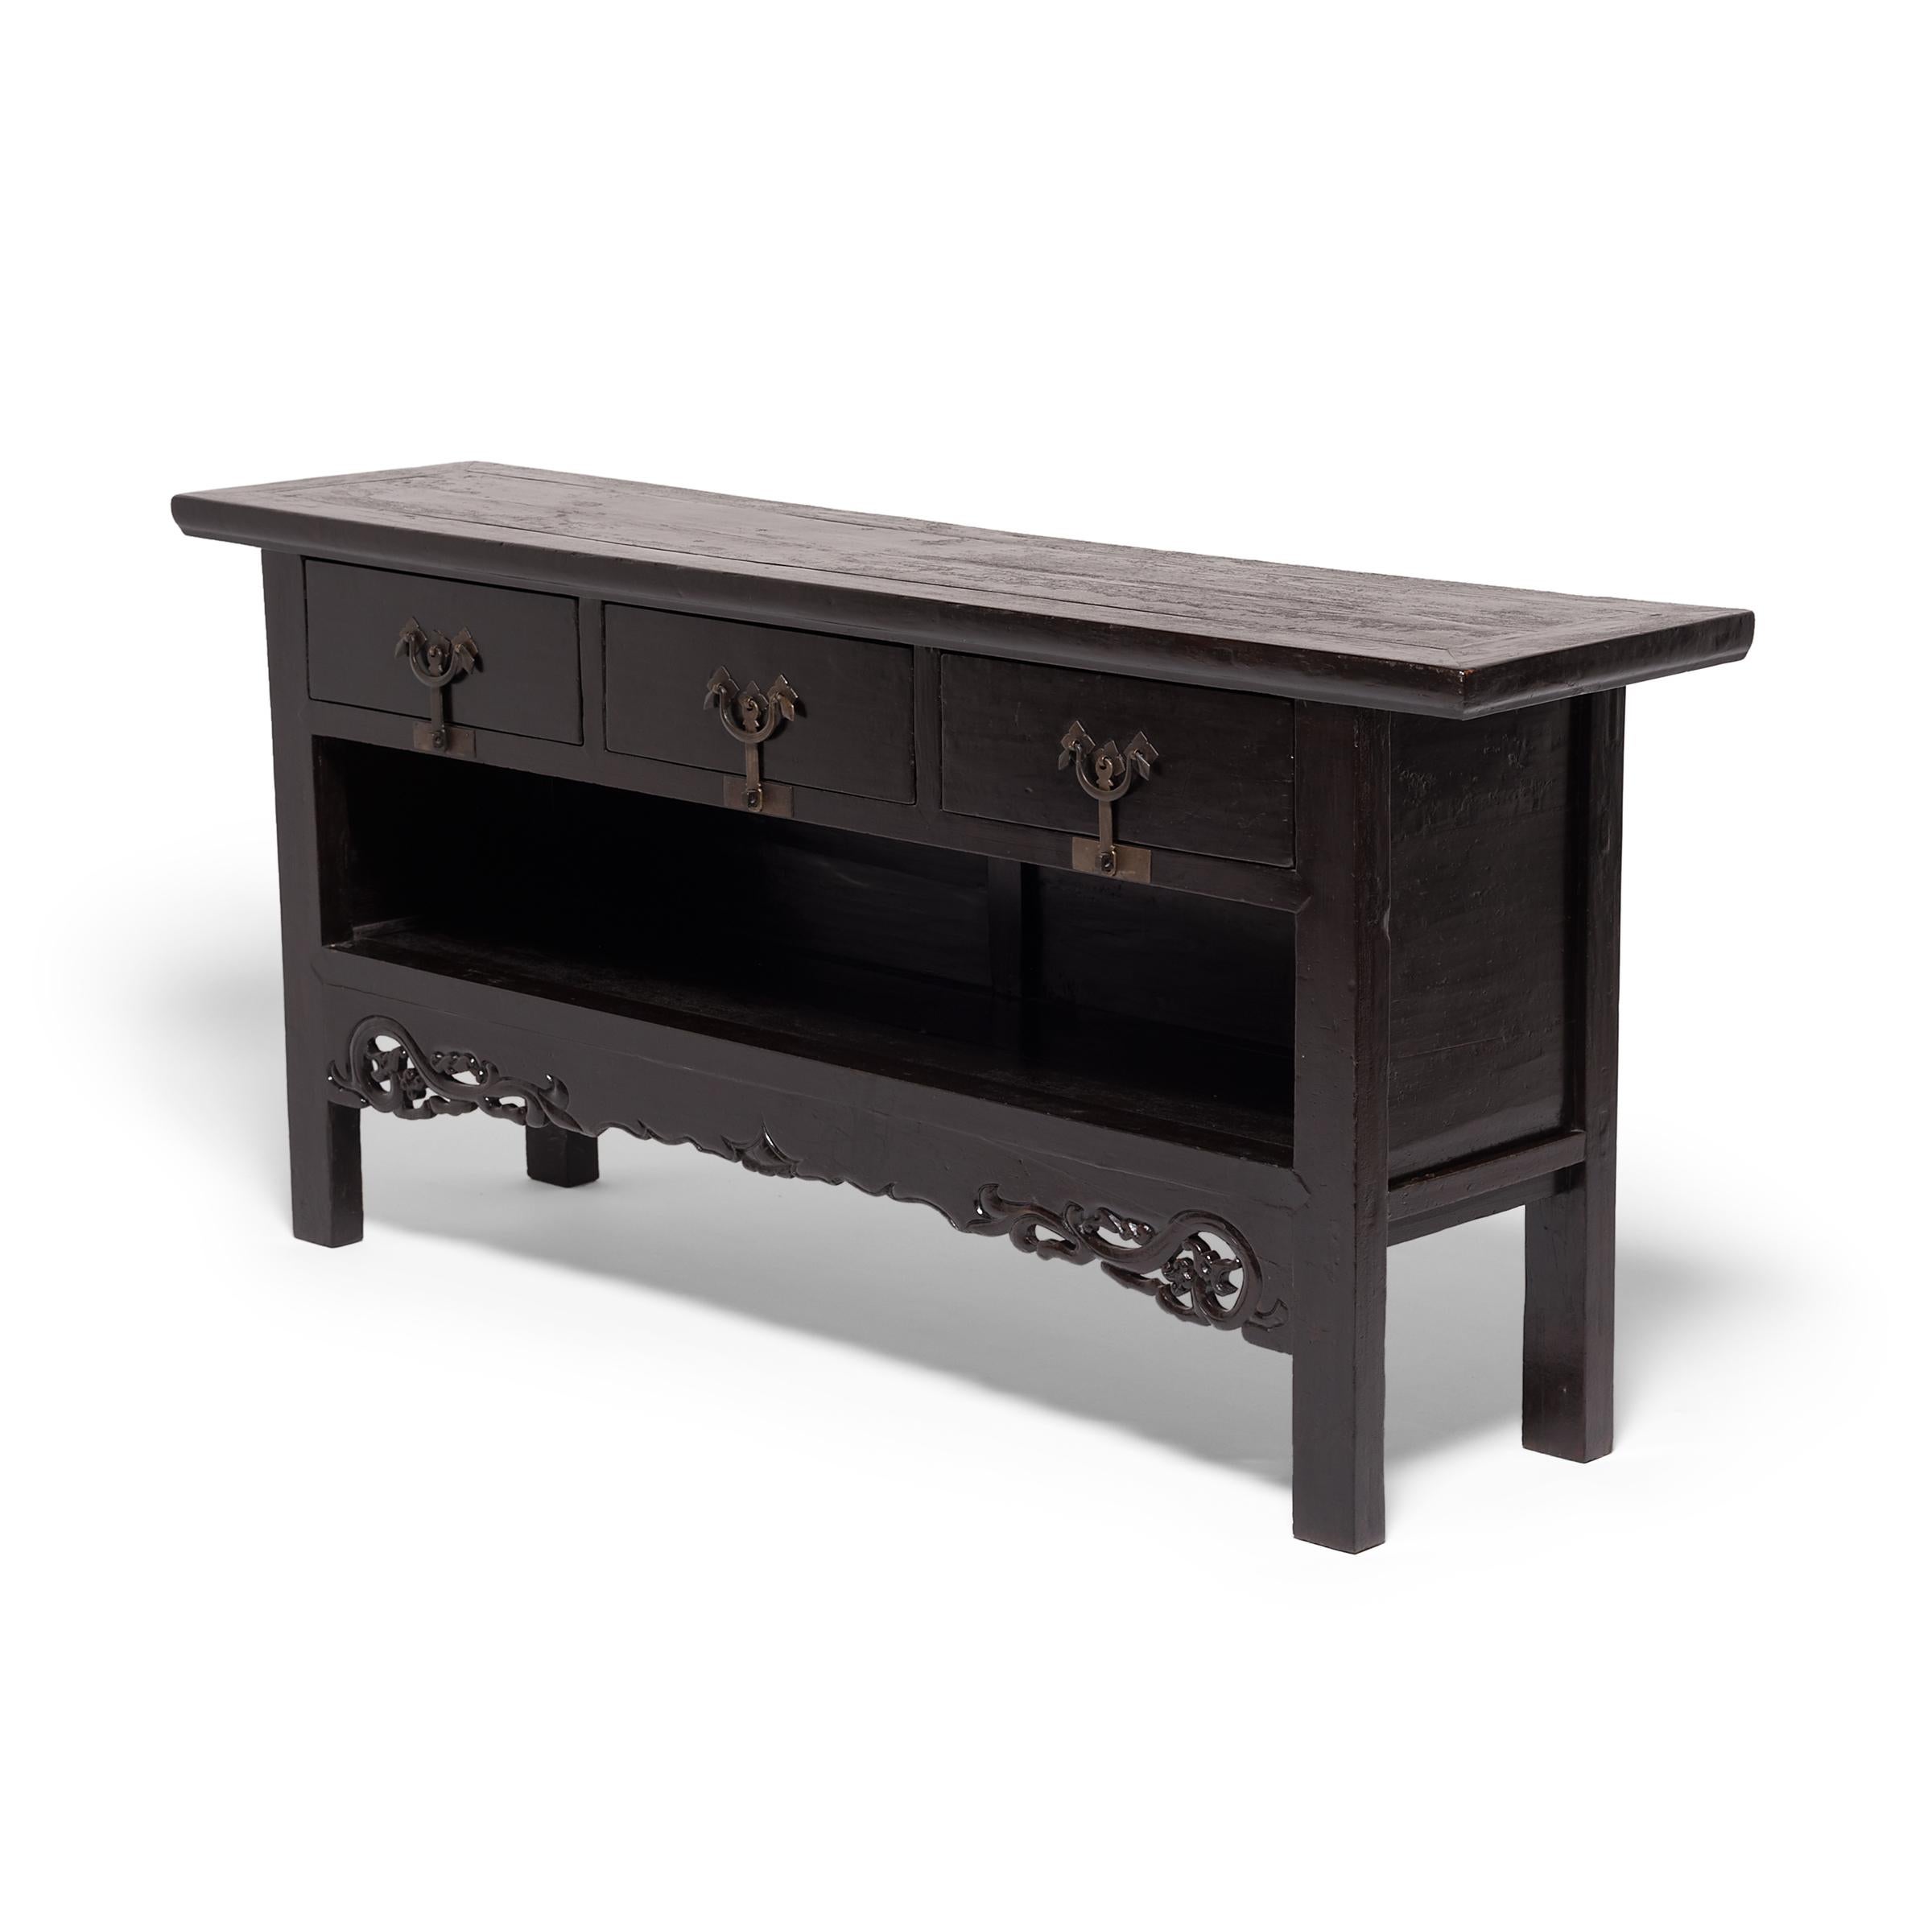 The sleek design of this 19th century three drawer coffer with an open shelf reflects the great tradition of classic Chinese furniture. Handcrafted of elmwood in China’s Henan province, the cabinet's impressive workmanship is evident in its balanced